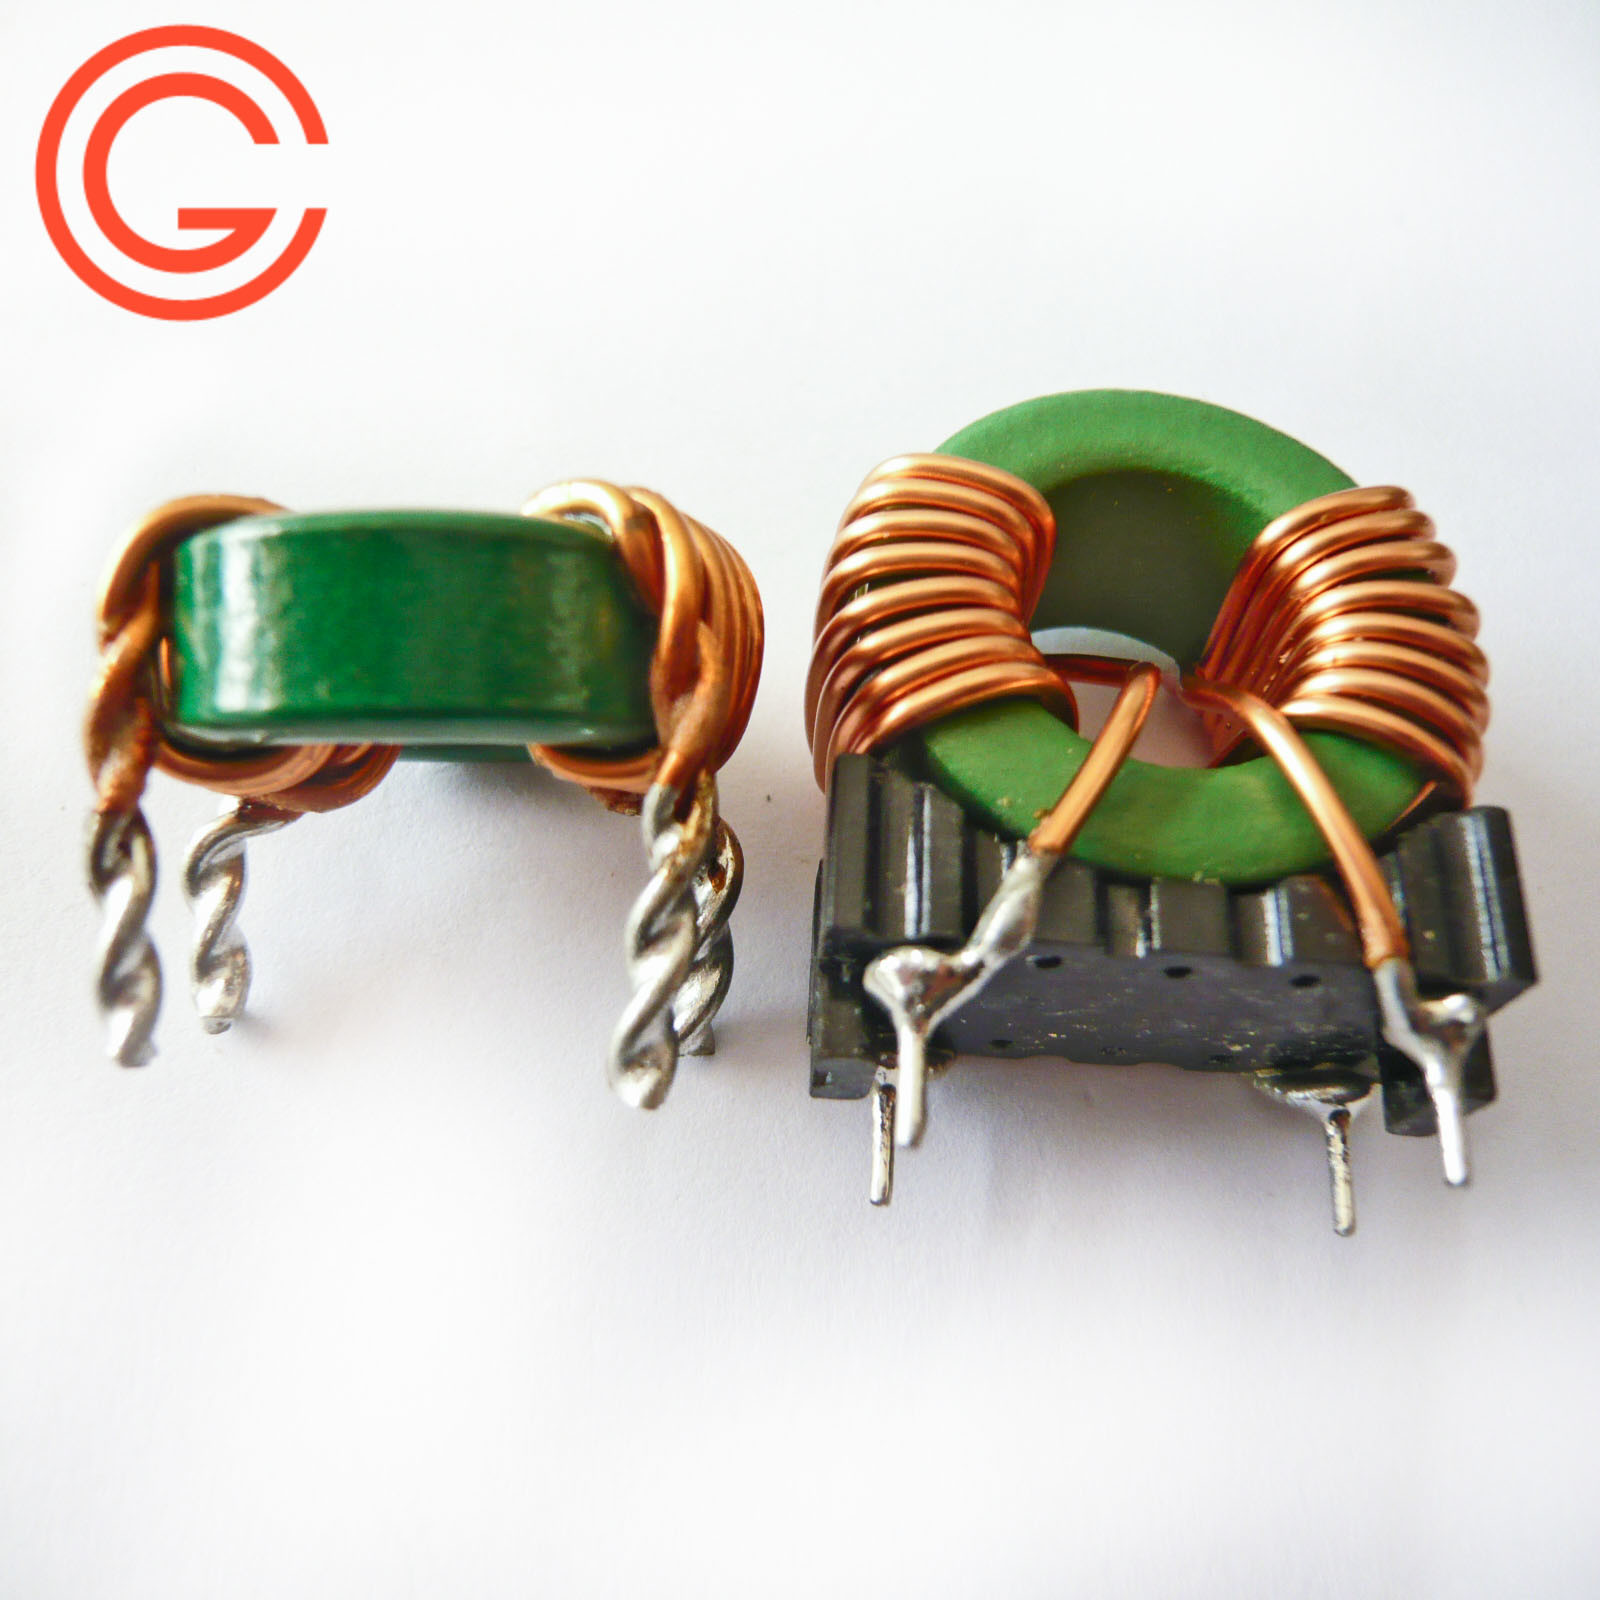 SGS/ISO 9001 Power Inductor Toroid Coils (GRT-TYPE)